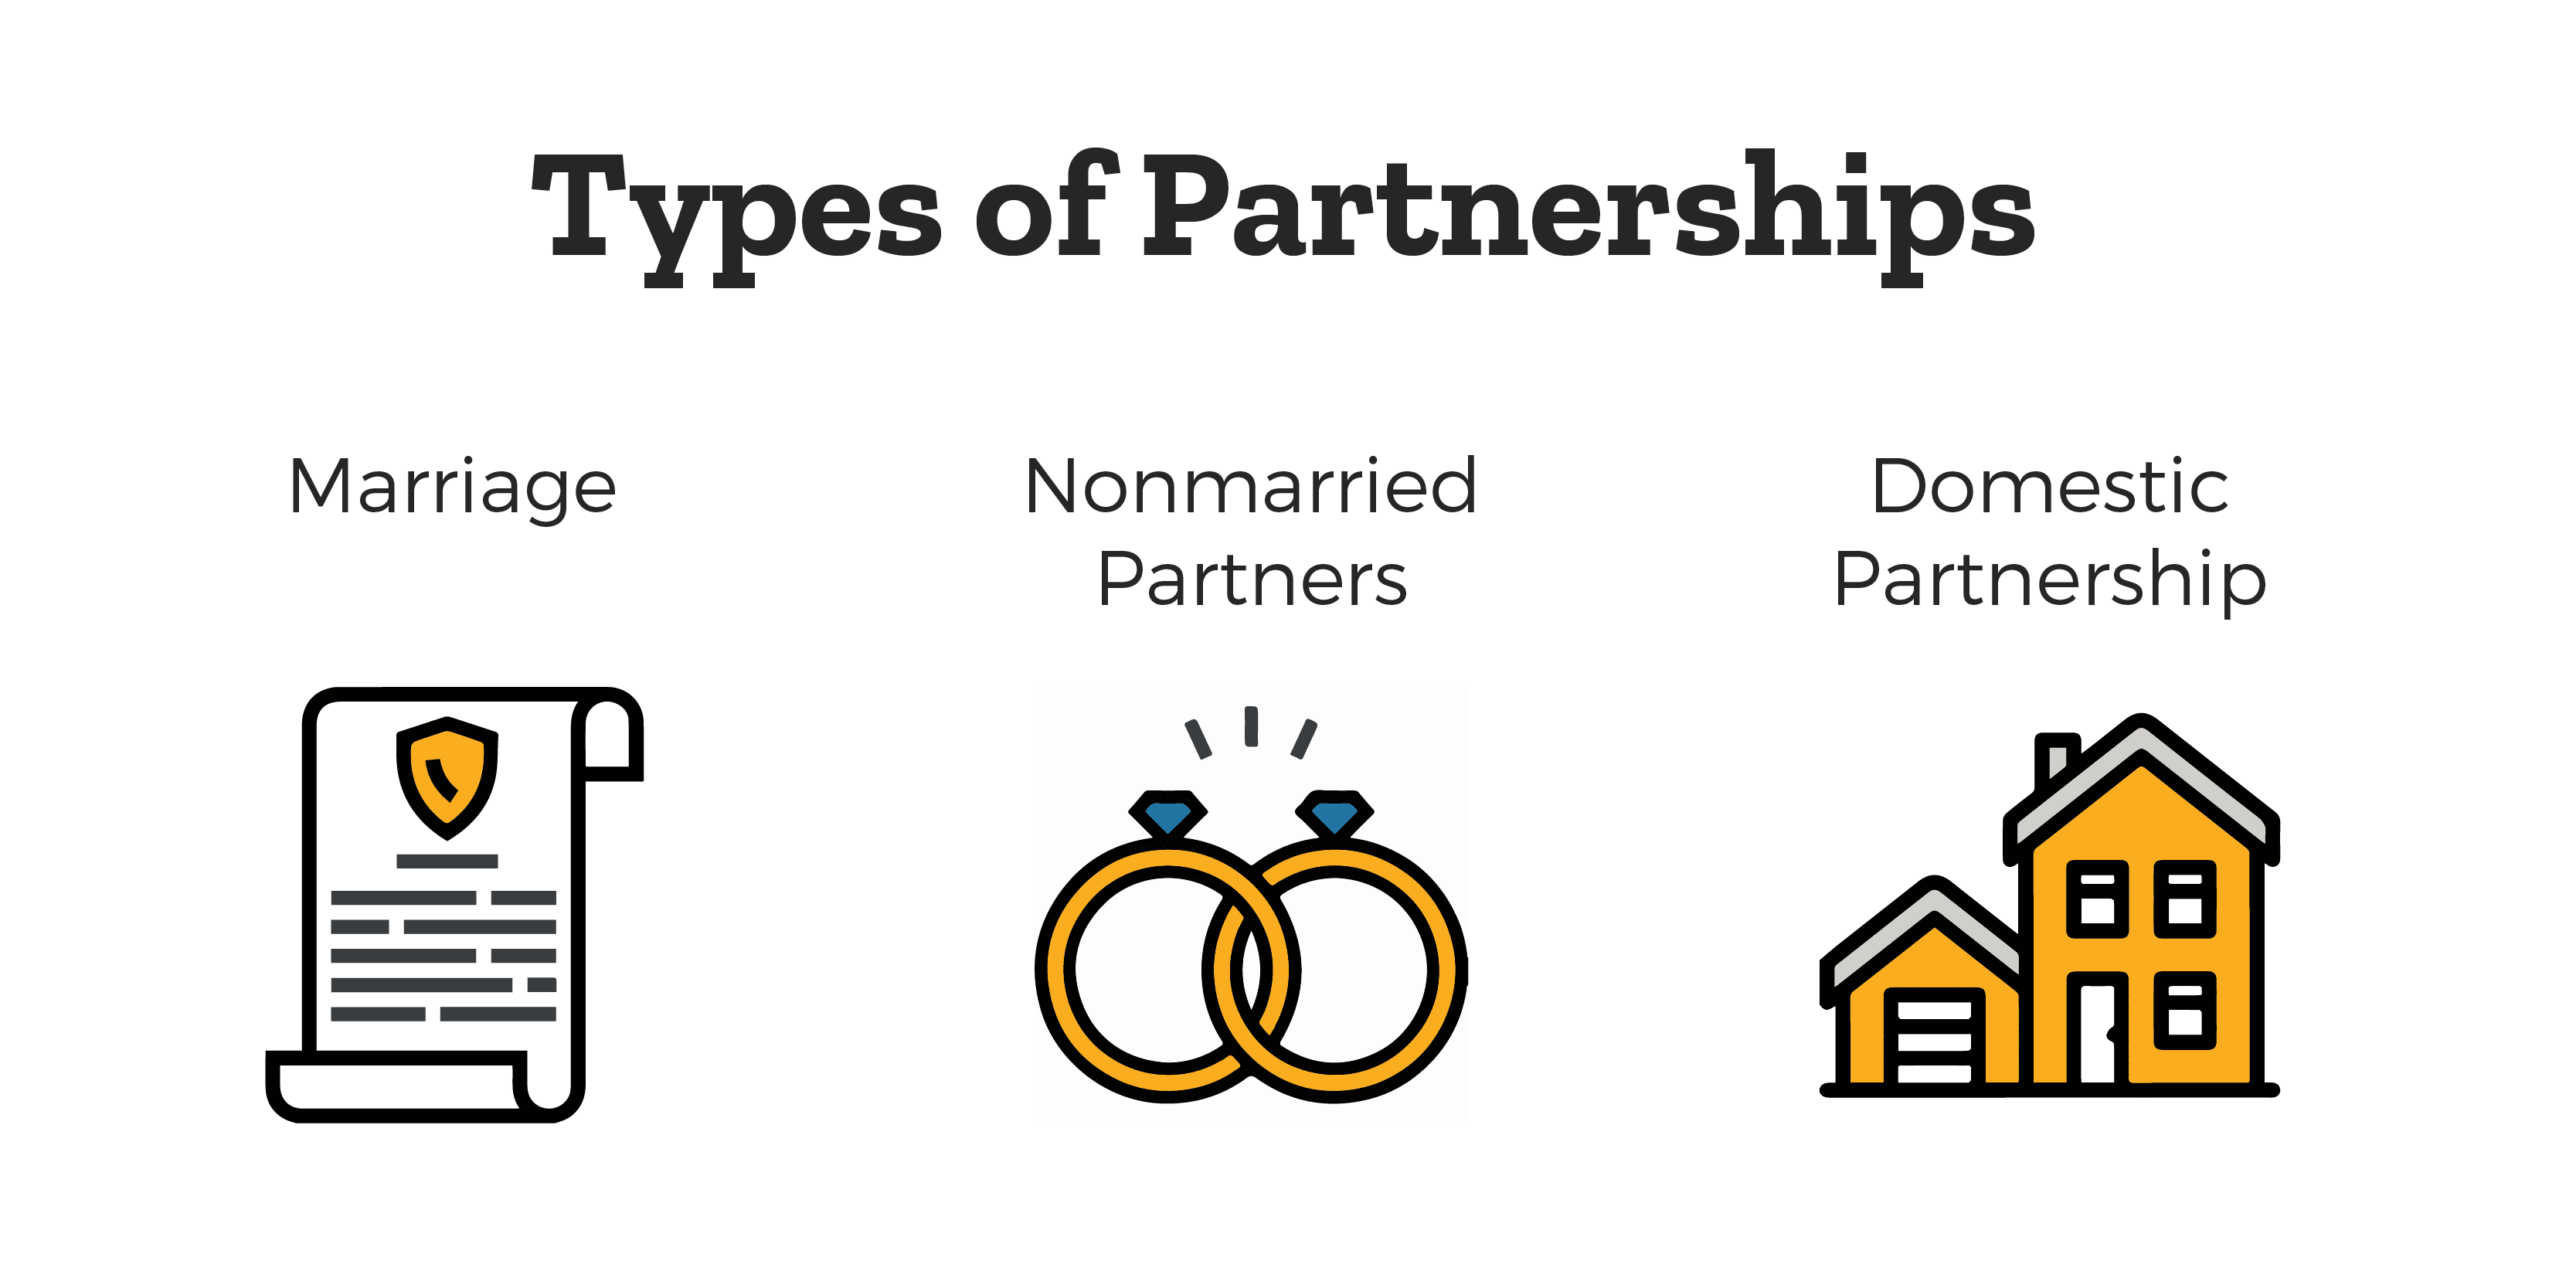 Types of Family Partnerships - Marriage, Nonmarried partners, and Domestic partnership.